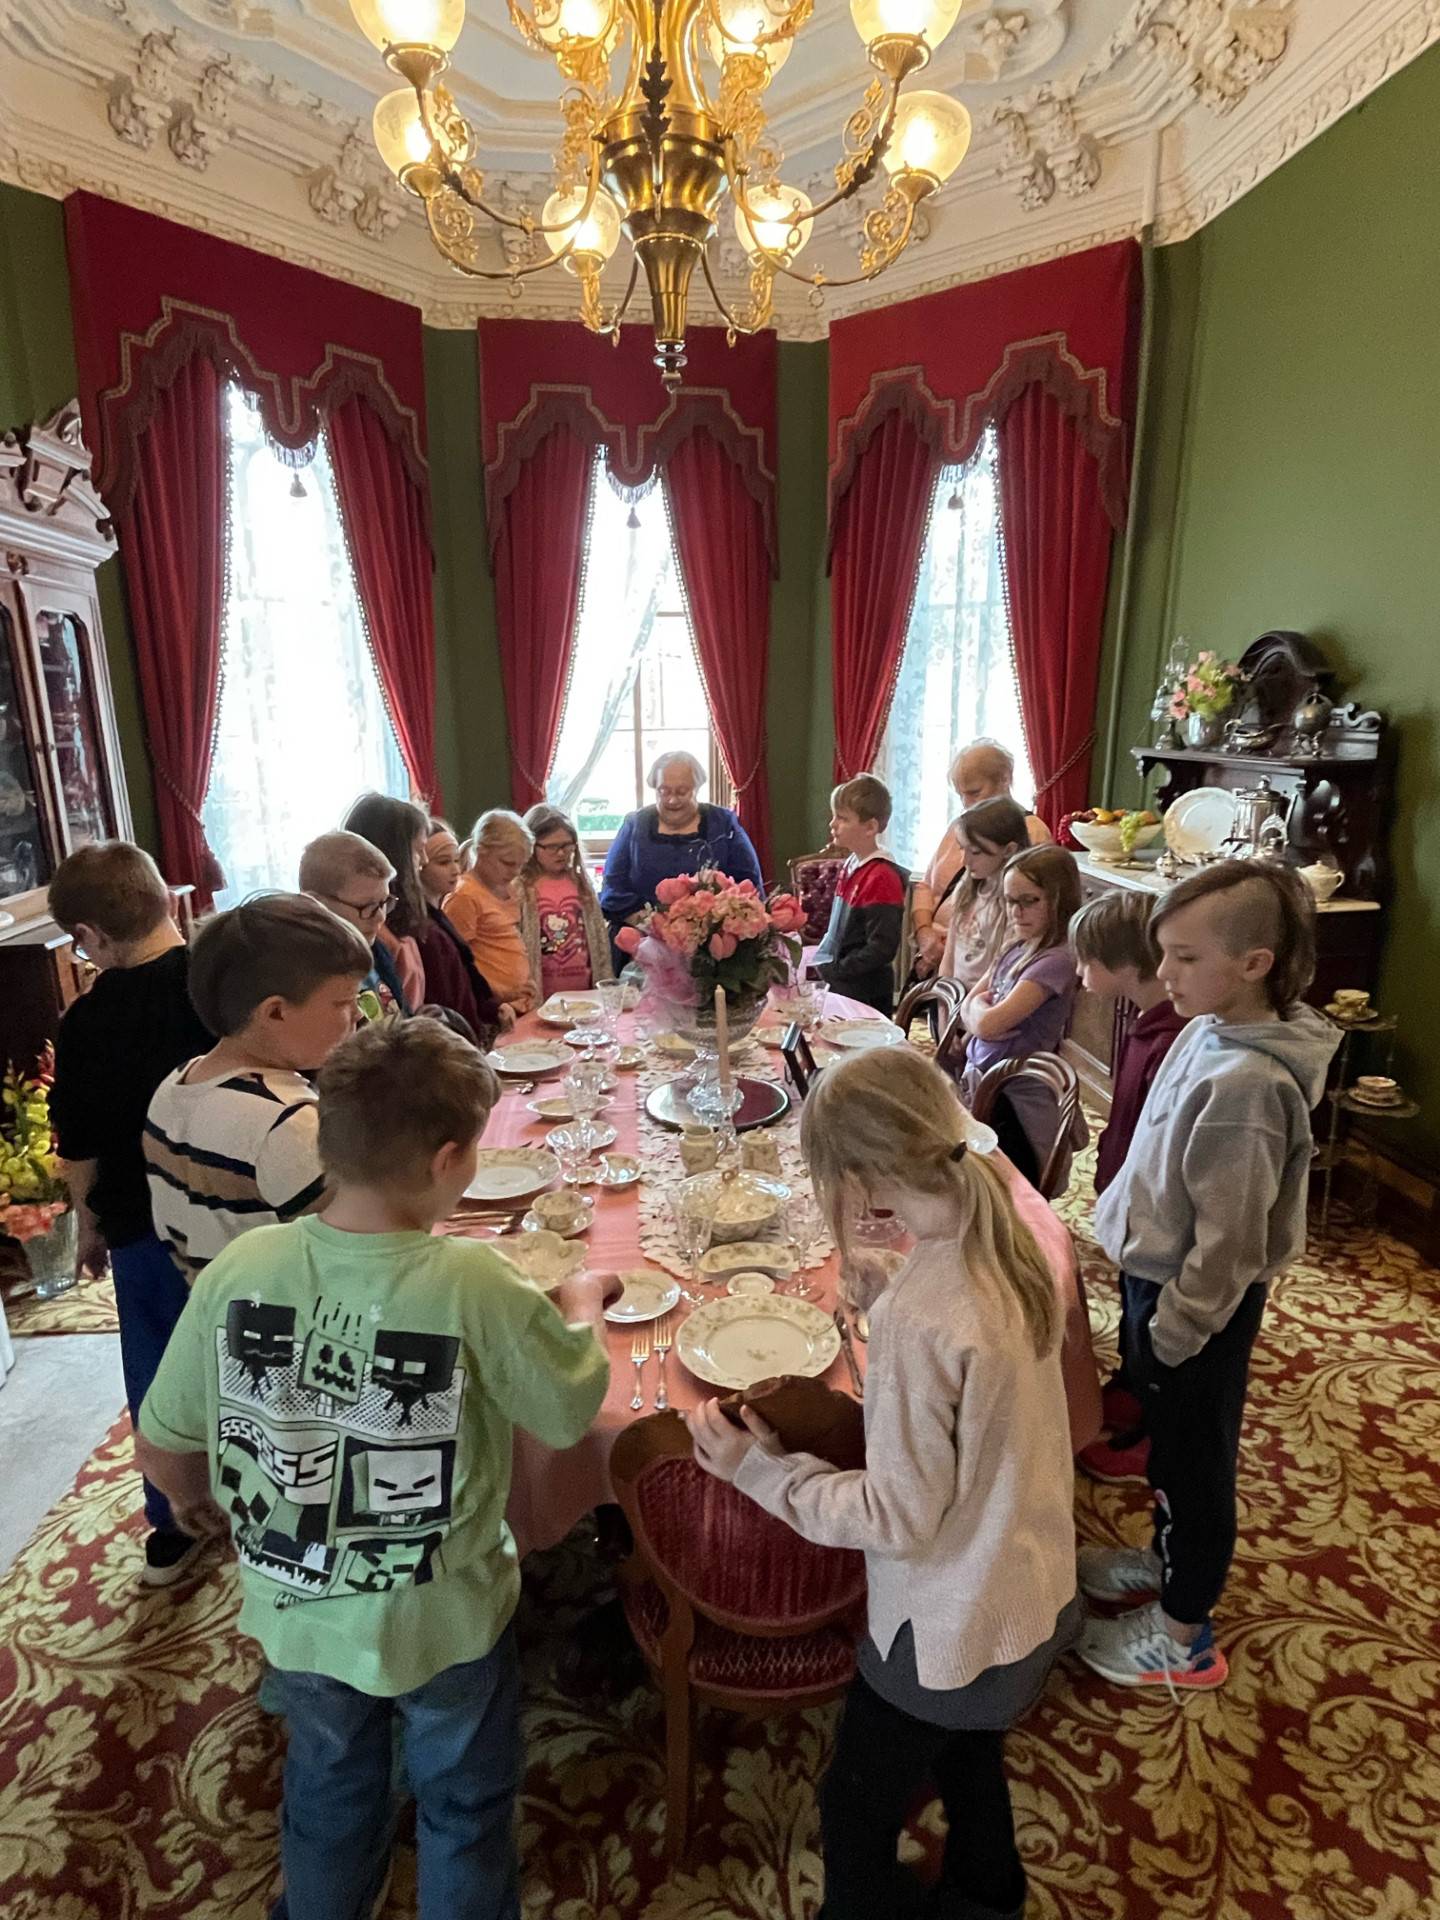 RMA president Lorraine McCallister gathers Grand Ridge students around the dining room table to discuss how a meal would have been served in Victorian times.